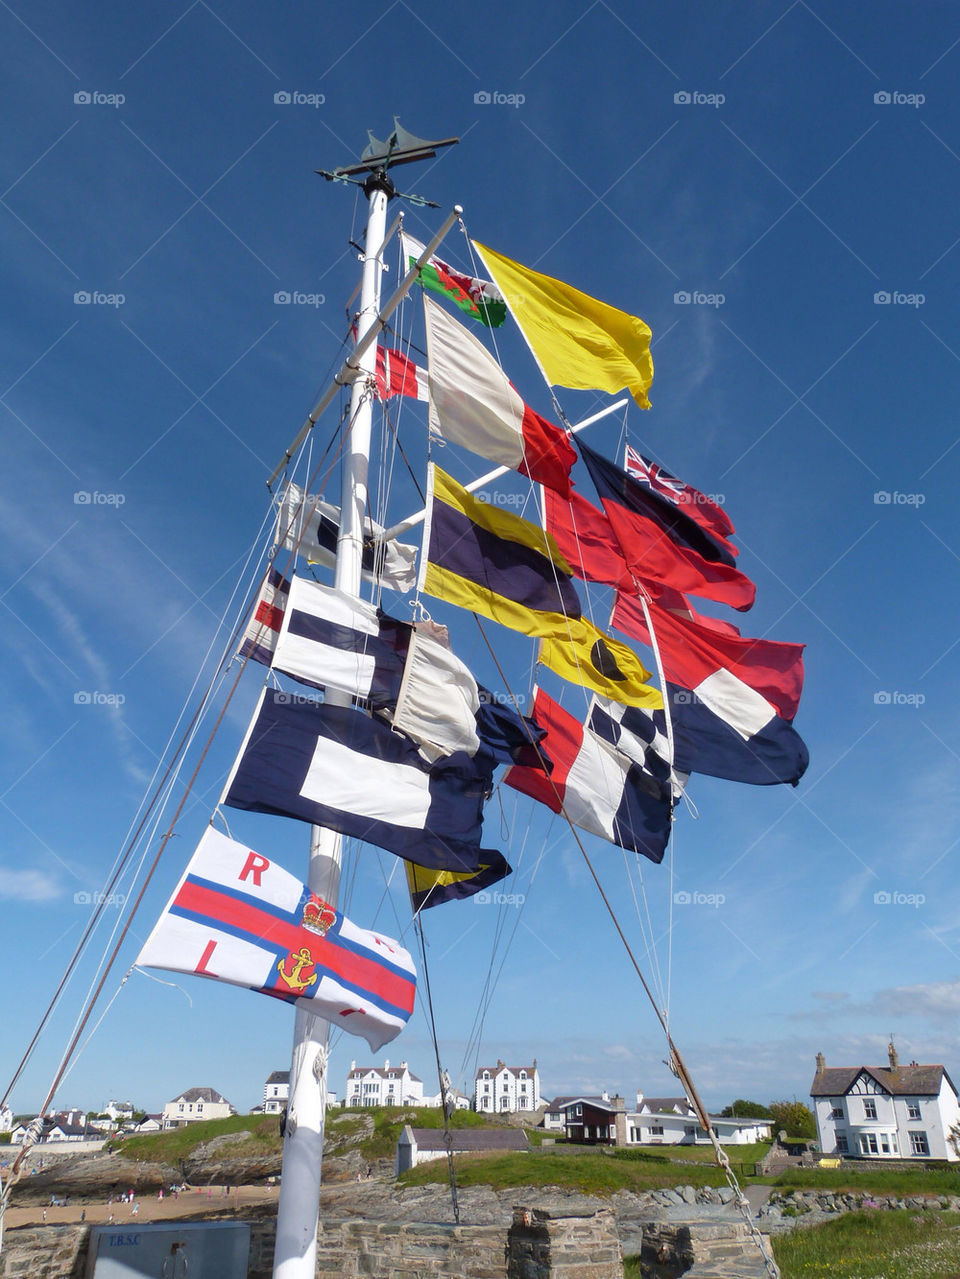 sky weather flags pole by samspeed87